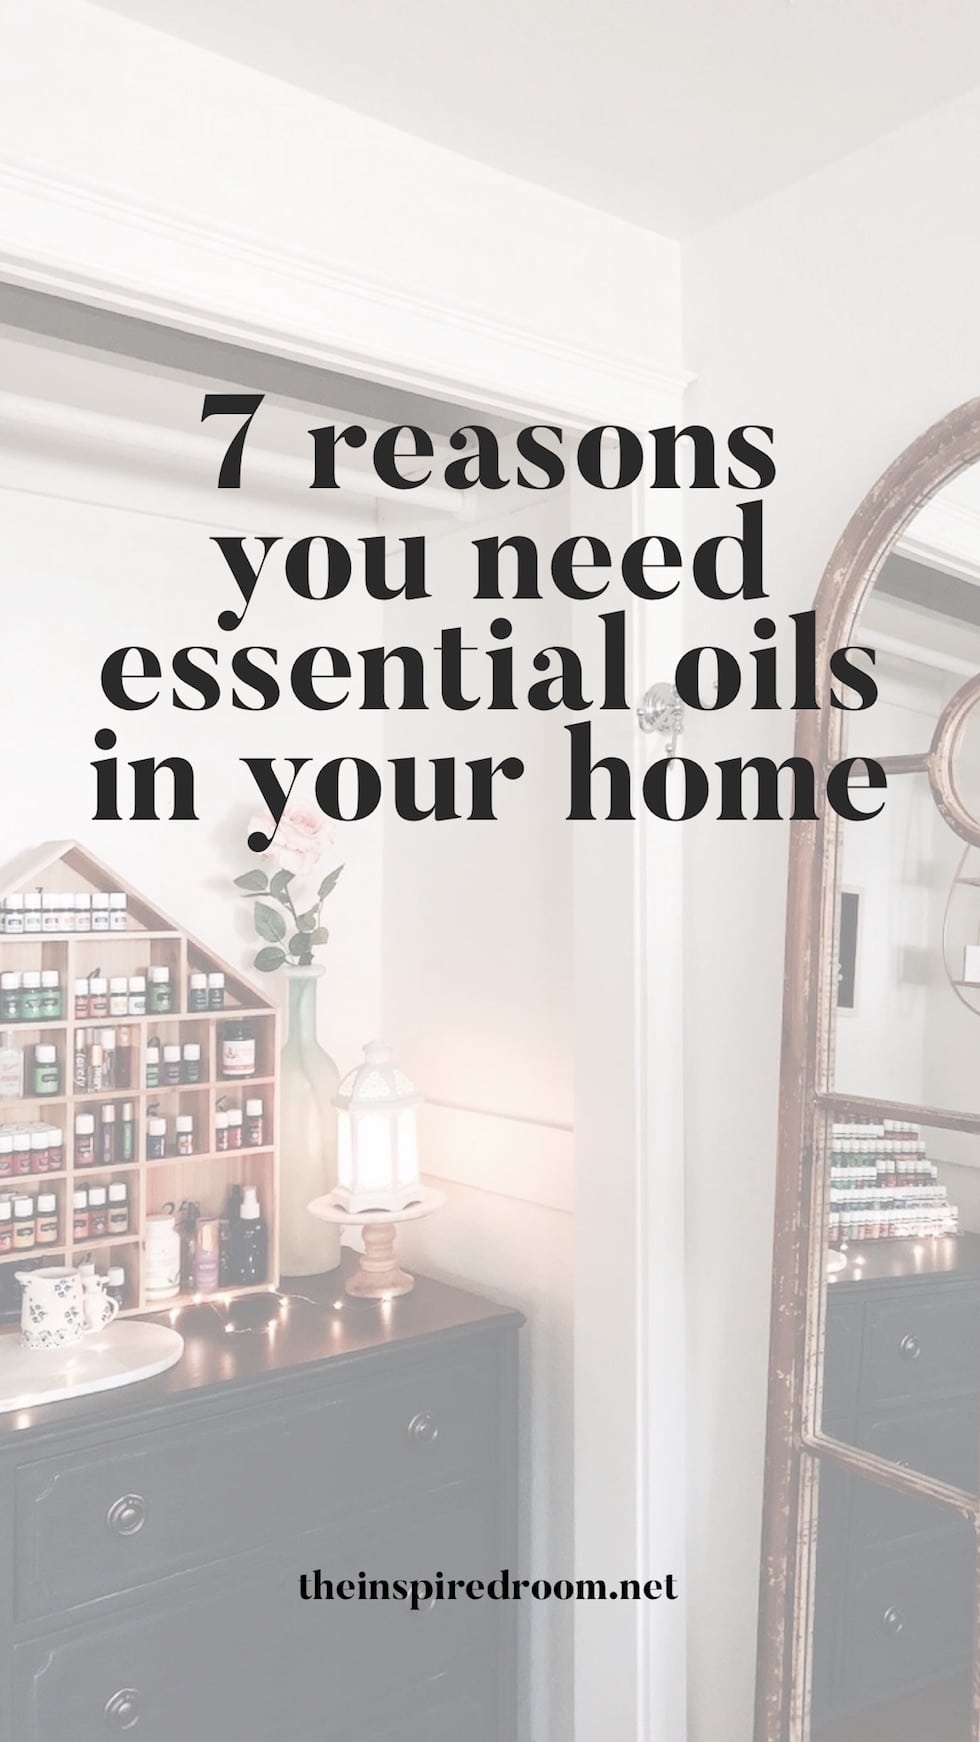 7 Reasons You Need Essential Oils in Your Home